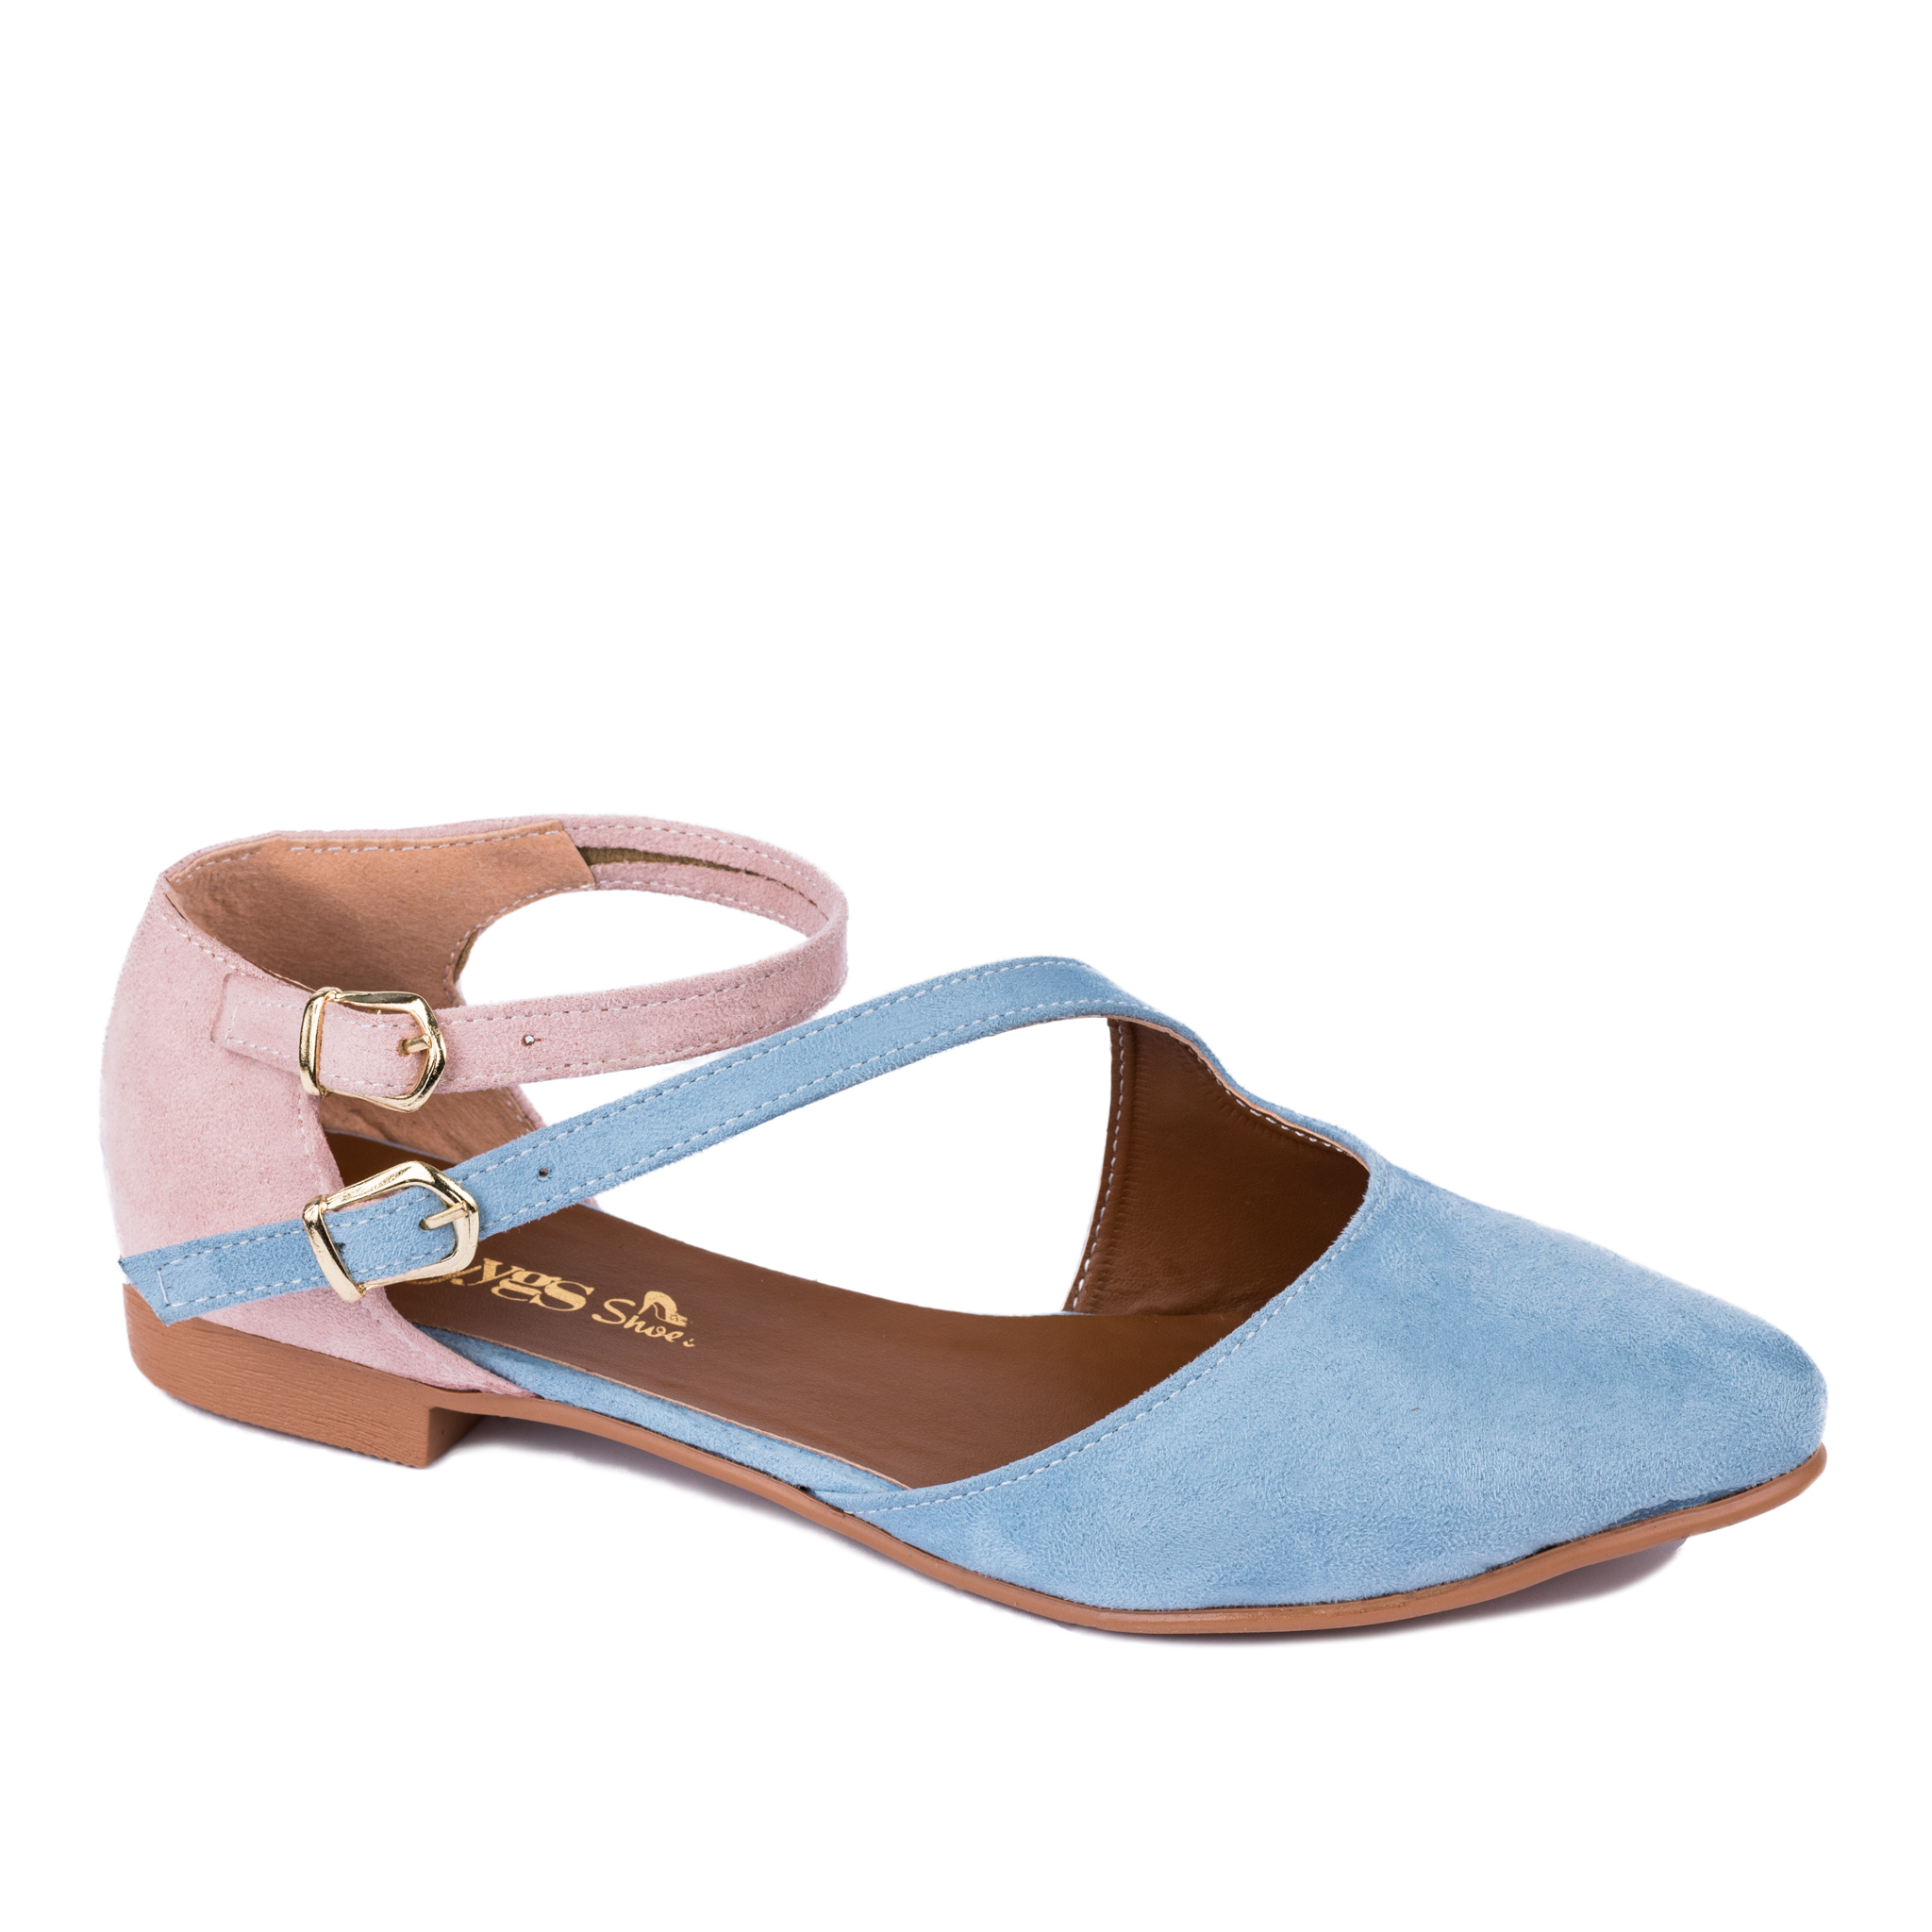 VELOUR FLATS WITH BELTS - BLUE/ROSE